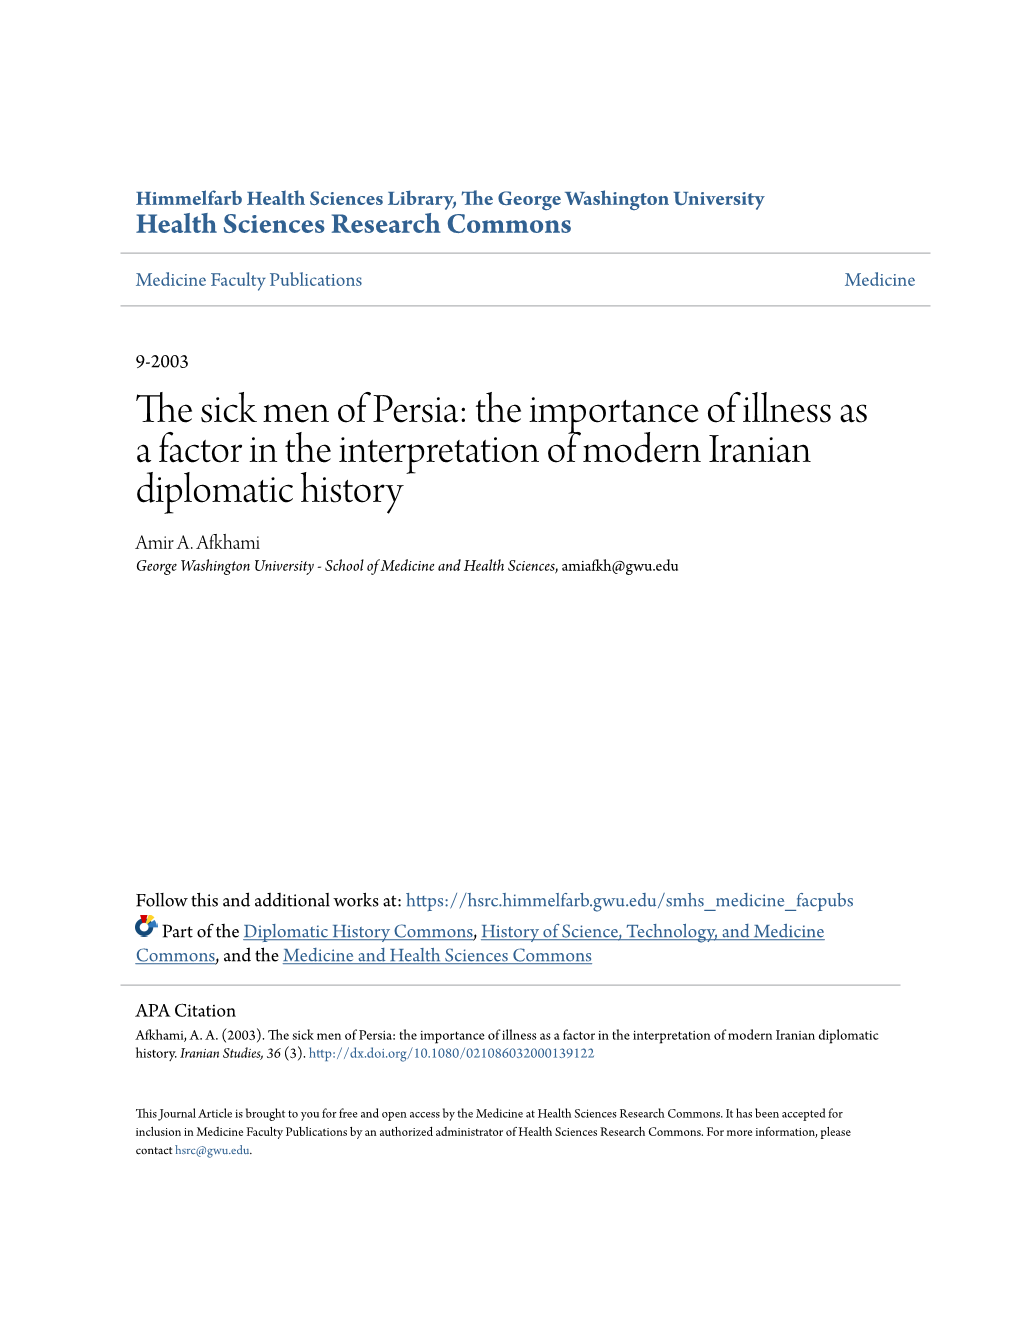 The Sick Men of Persia: the Importance of Illness As a Factor in the Interpretation of Modern Iranian Diplomatic History Amir A